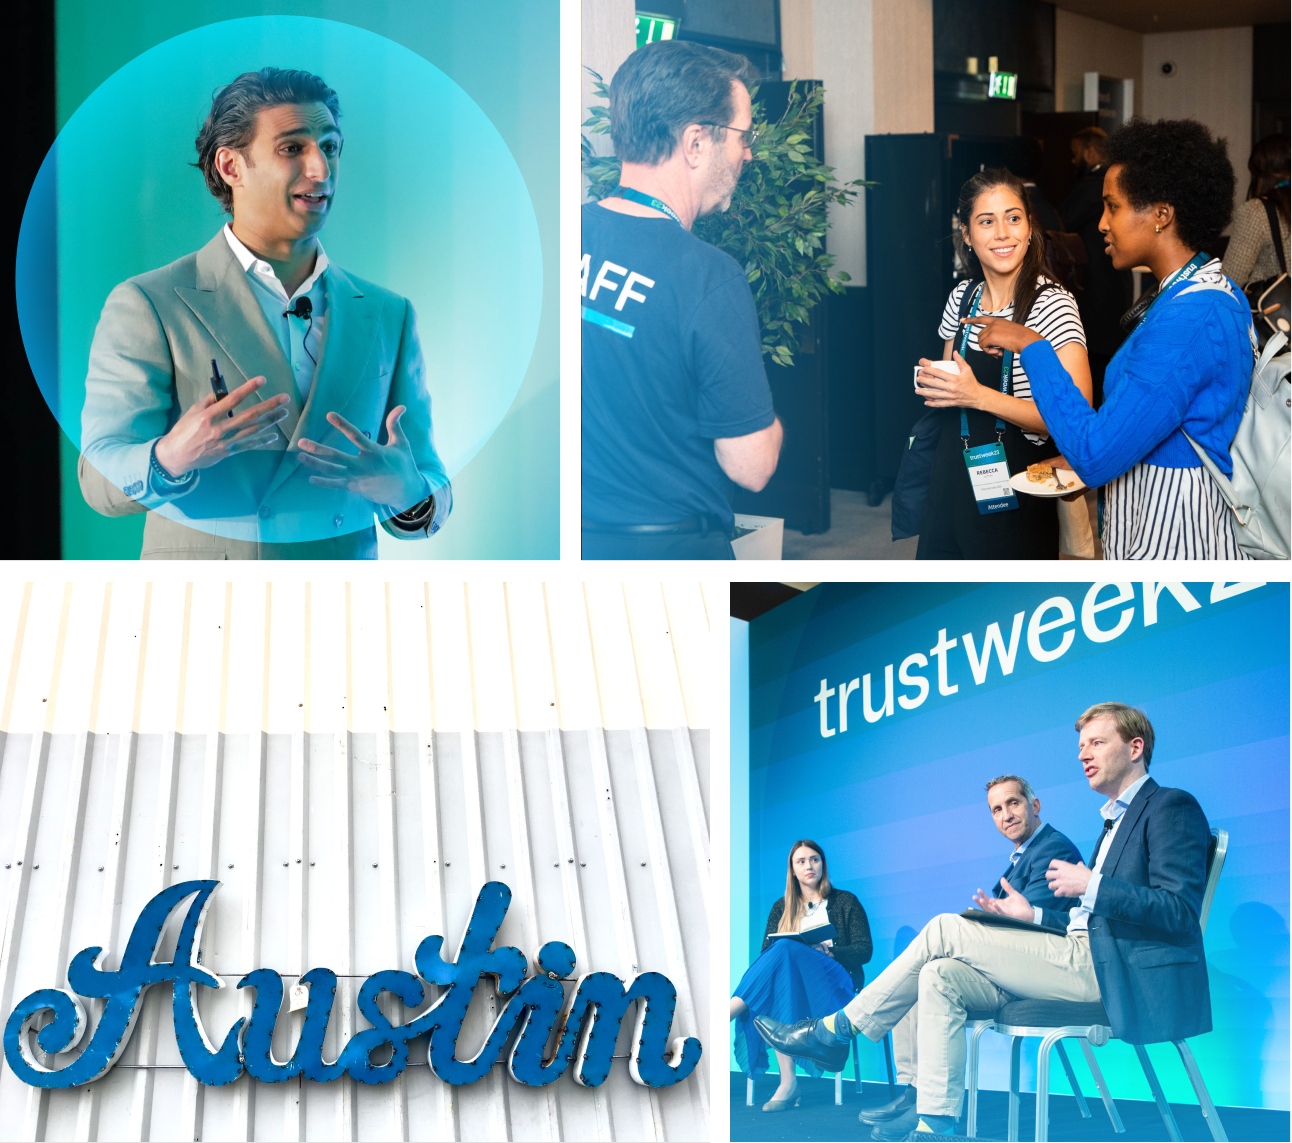 Collage of images from TrustWeek conference including shots of audience members and panels